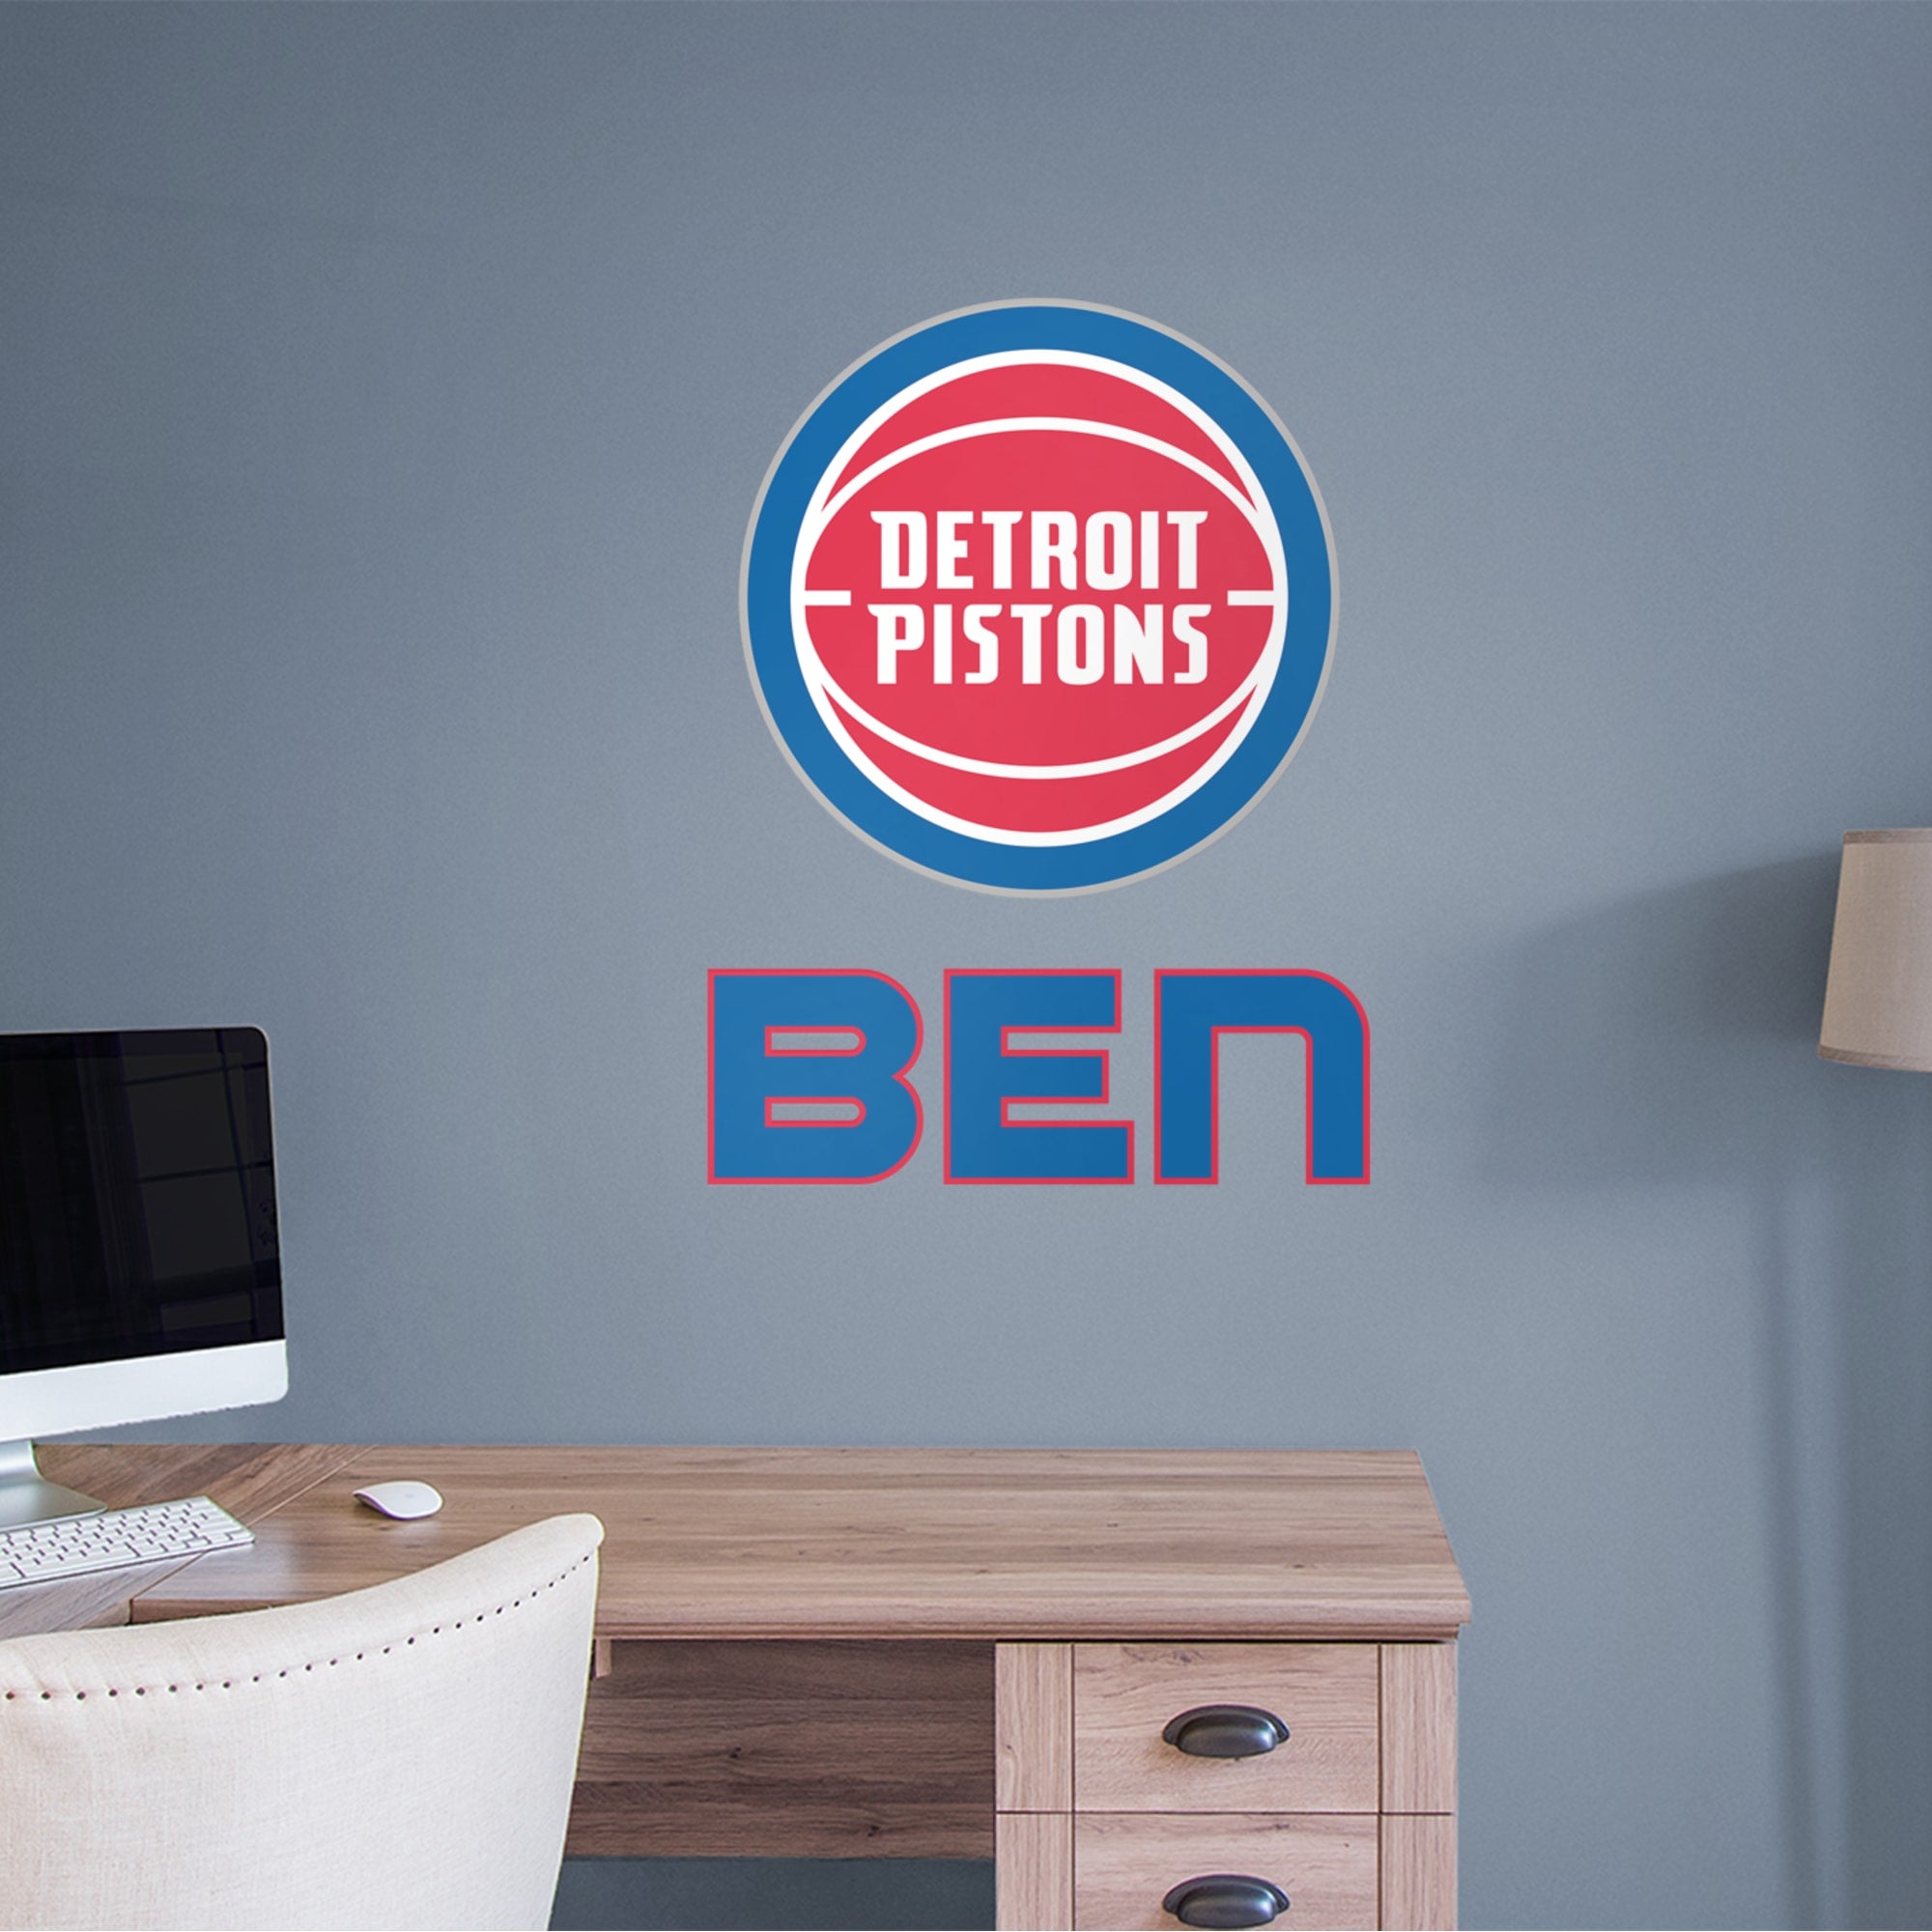 Detroit Pistons: Stacked Personalized Name - Officially Licensed NBA Transfer Decal in Blue (39.5"W x 52"H) by Fathead | Vinyl